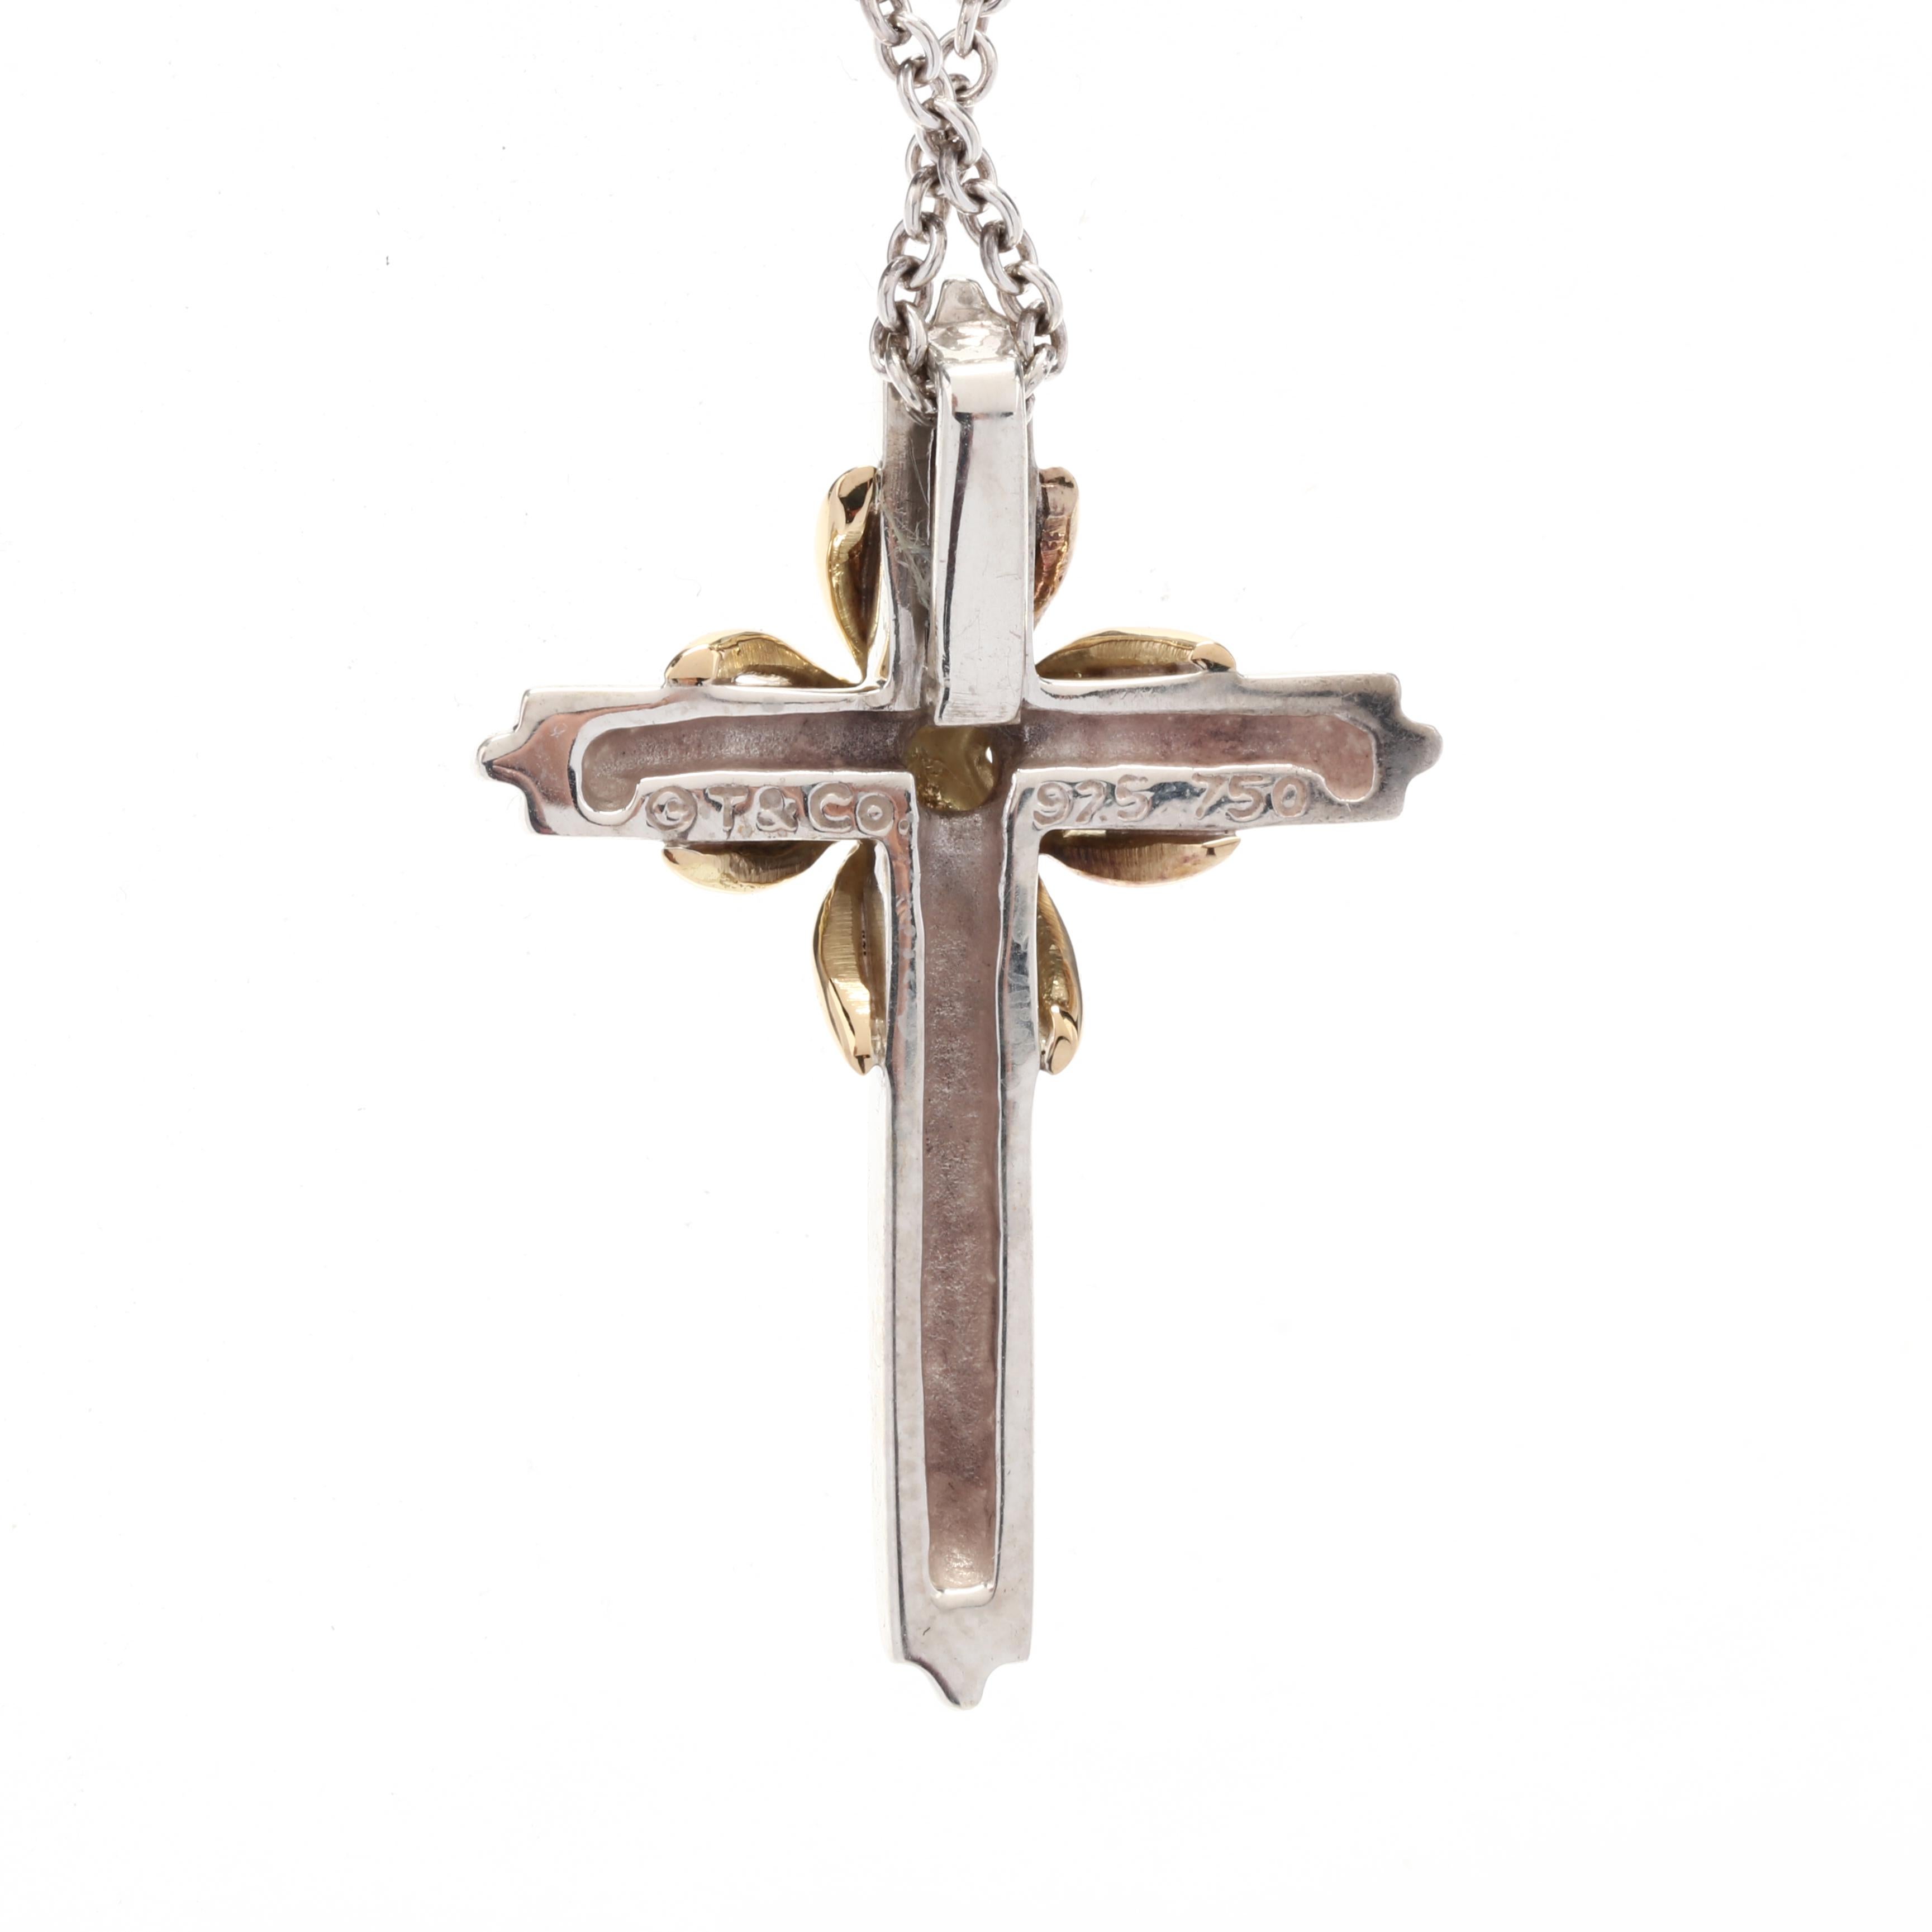 This Tiffany & Company Large Cross Necklace is a timeless and elegant piece of jewelry that is sure to make a statement. Made from 18K yellow gold and sterling silver, this necklace features a two-tone cross pendant that exudes sophistication and